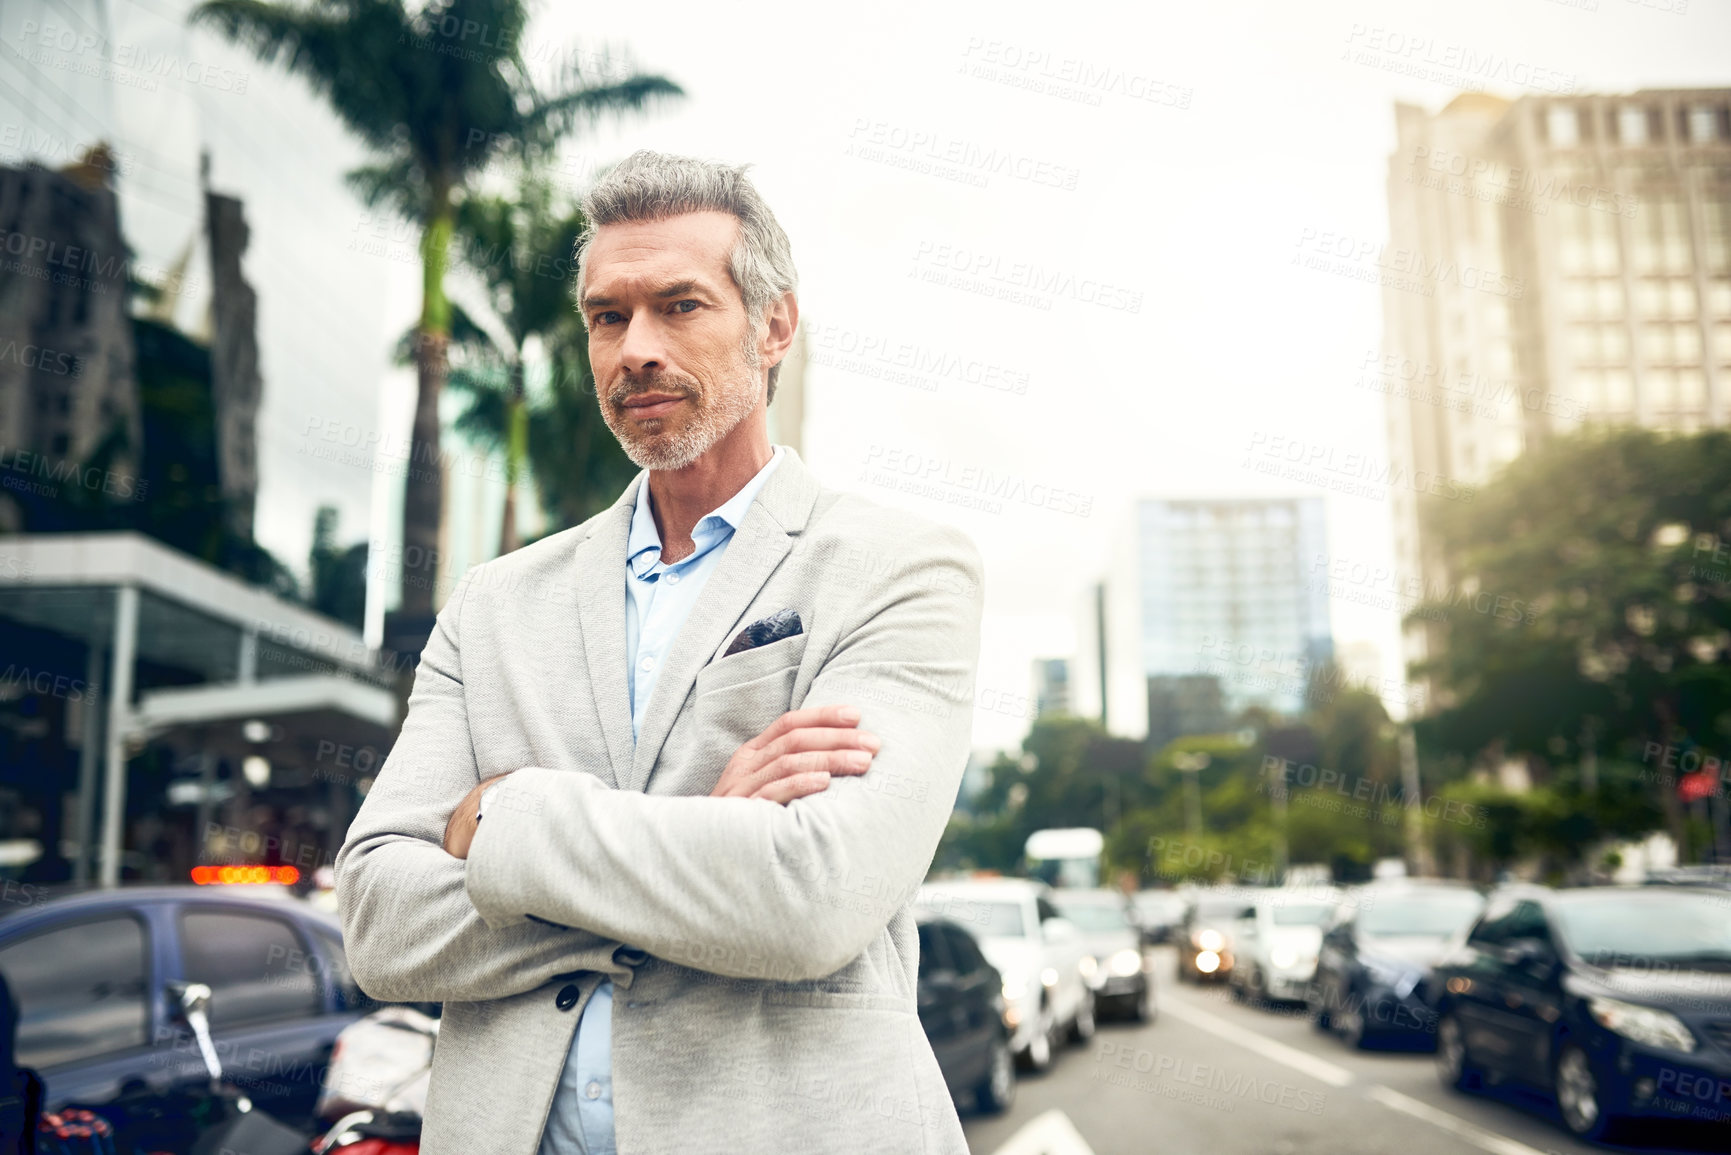 Buy stock photo Portrait of a mature businessman standing in the city